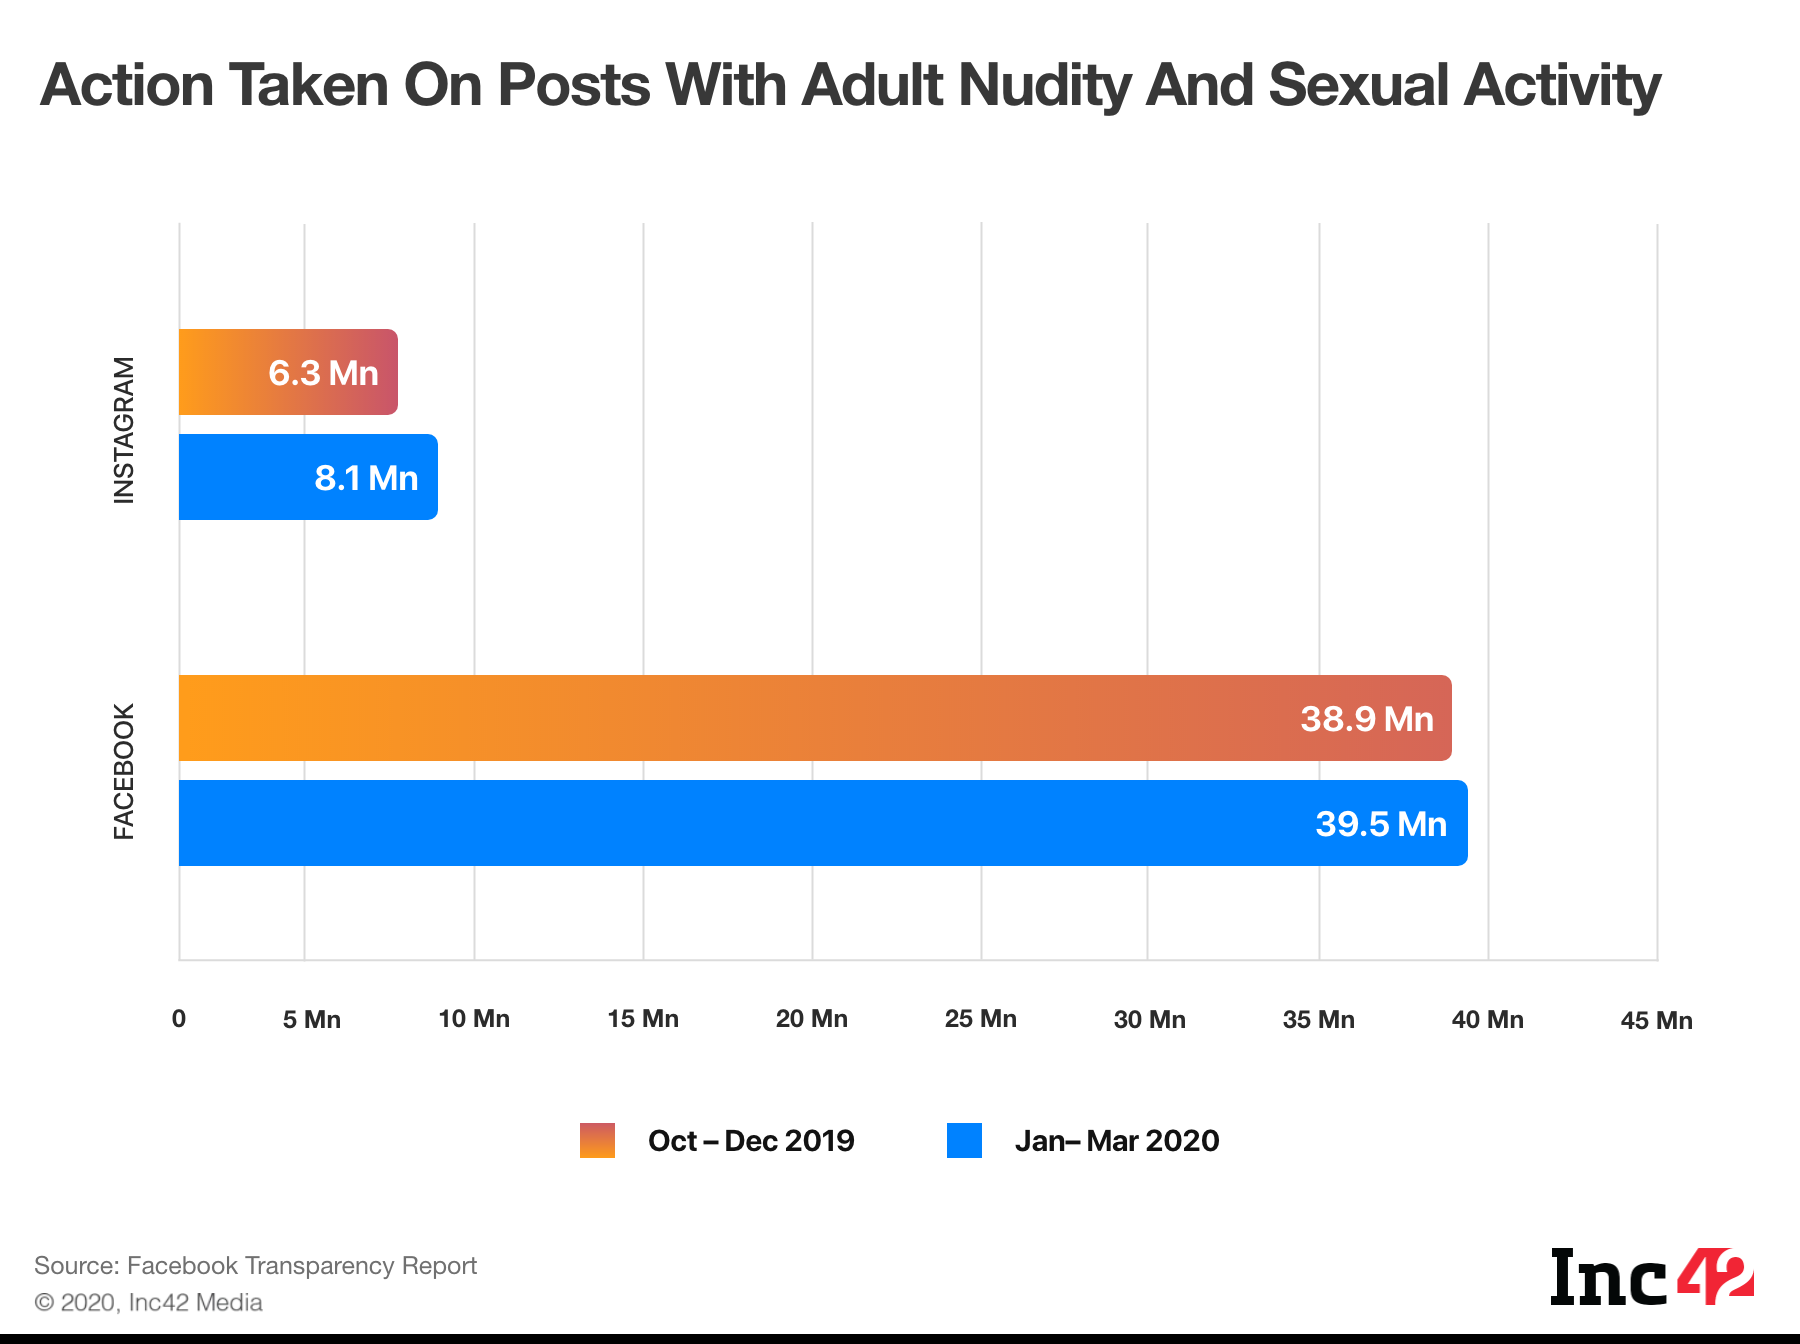 Instagram Flags 1 Mn Cases Of Child Nudity, Exploitation In 2020